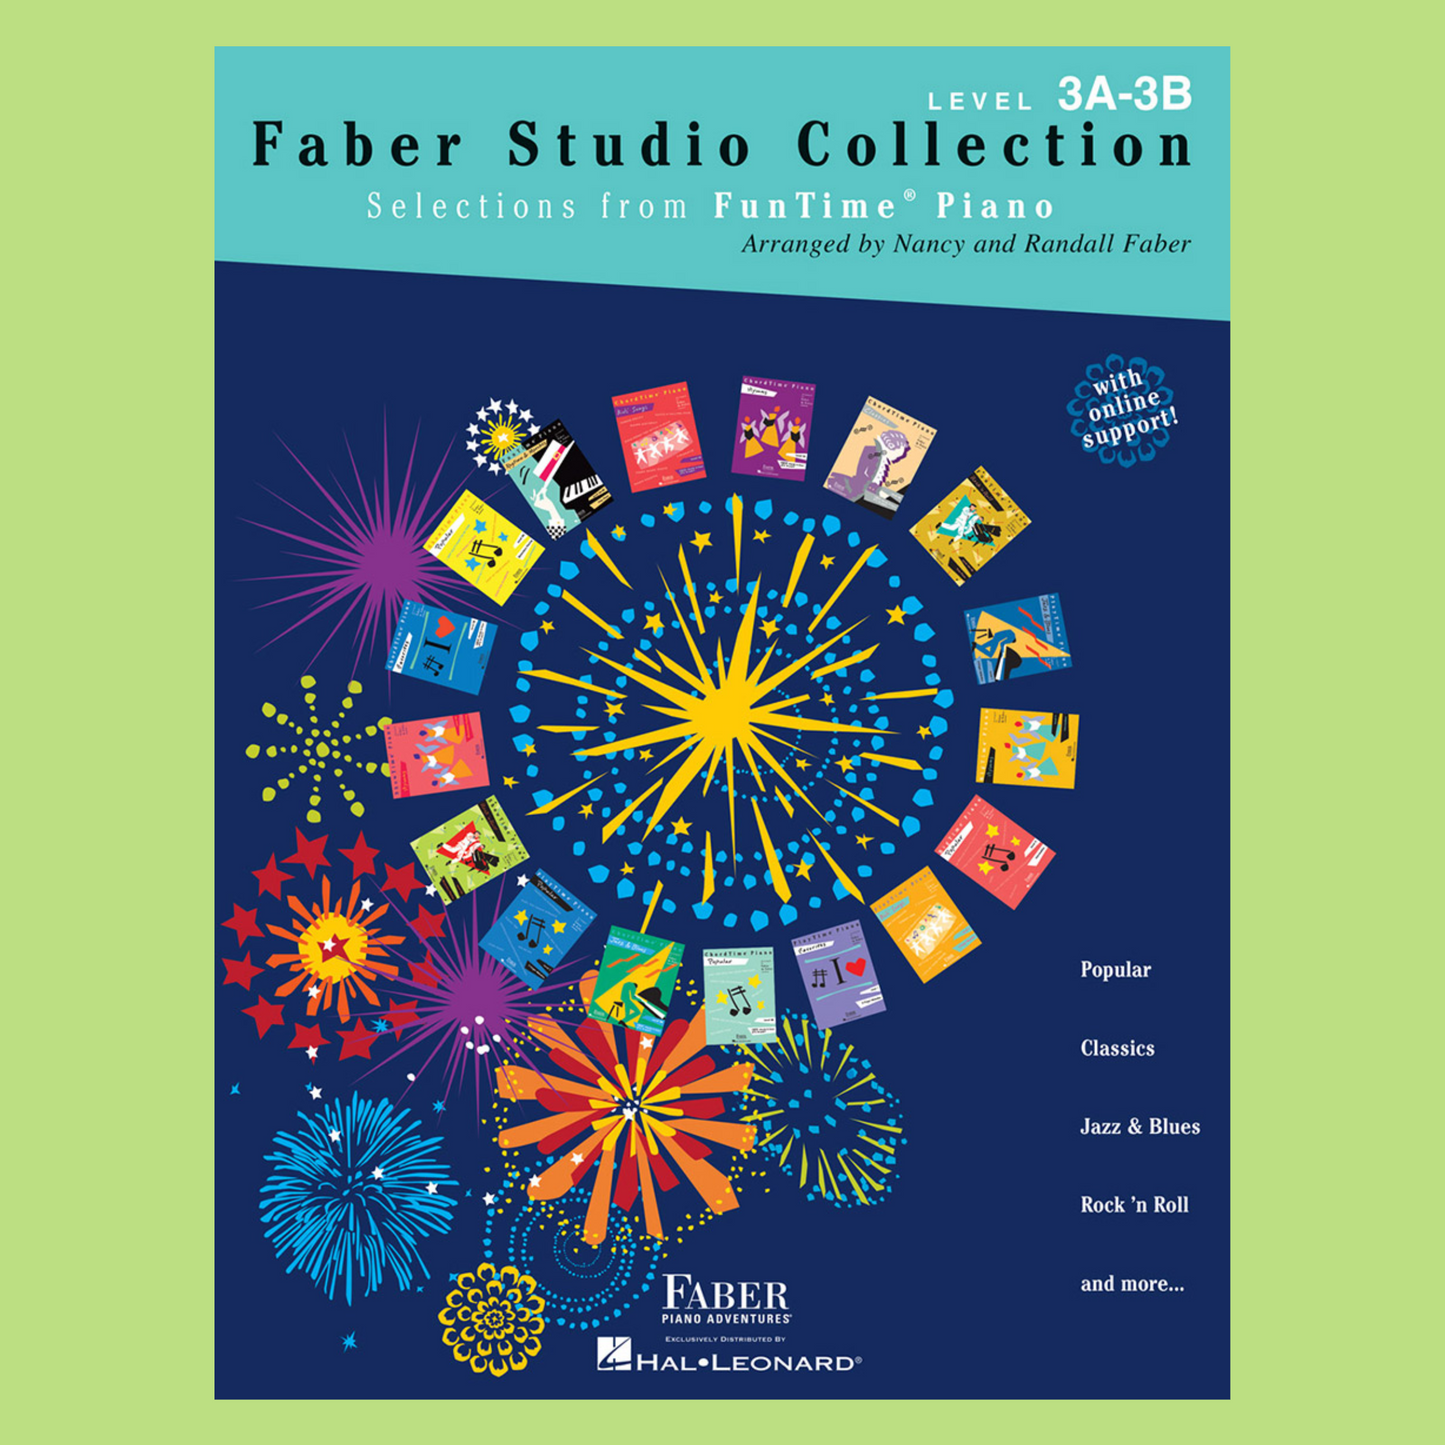 Faber Piano Adventures: Funtime Studio Collection 3A-3B Book & Keyboard